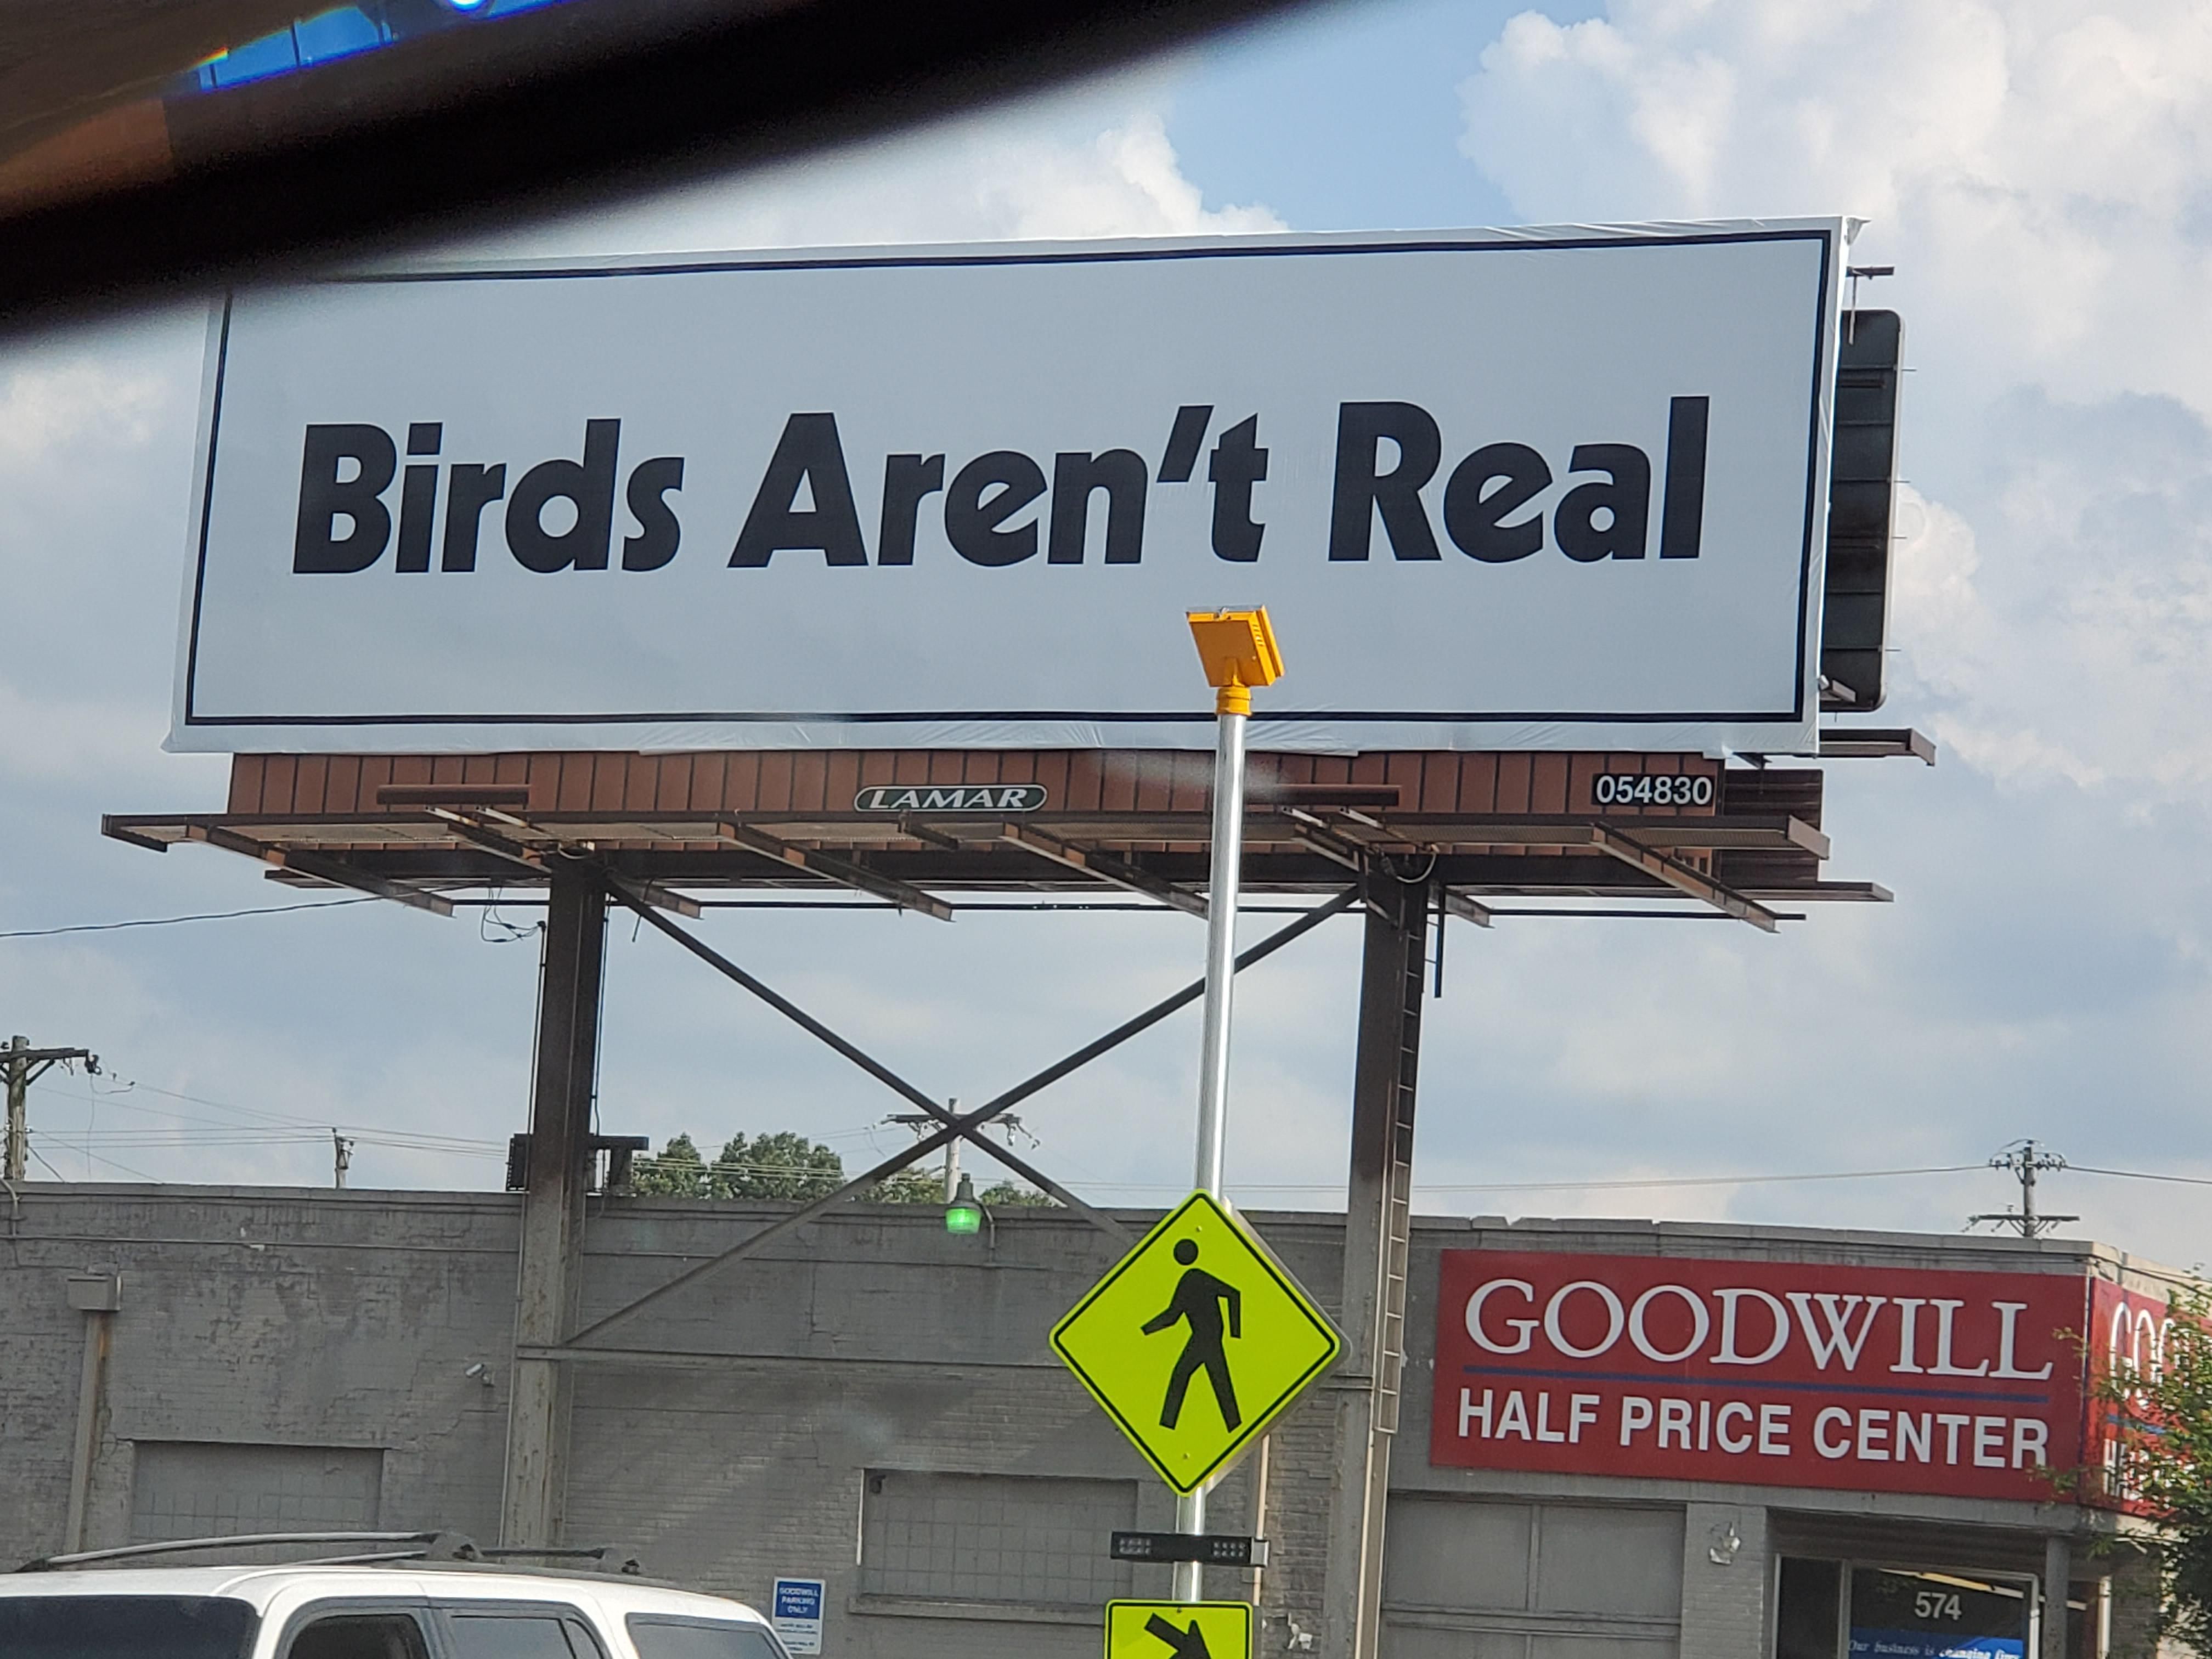 An actual billboard in my city.